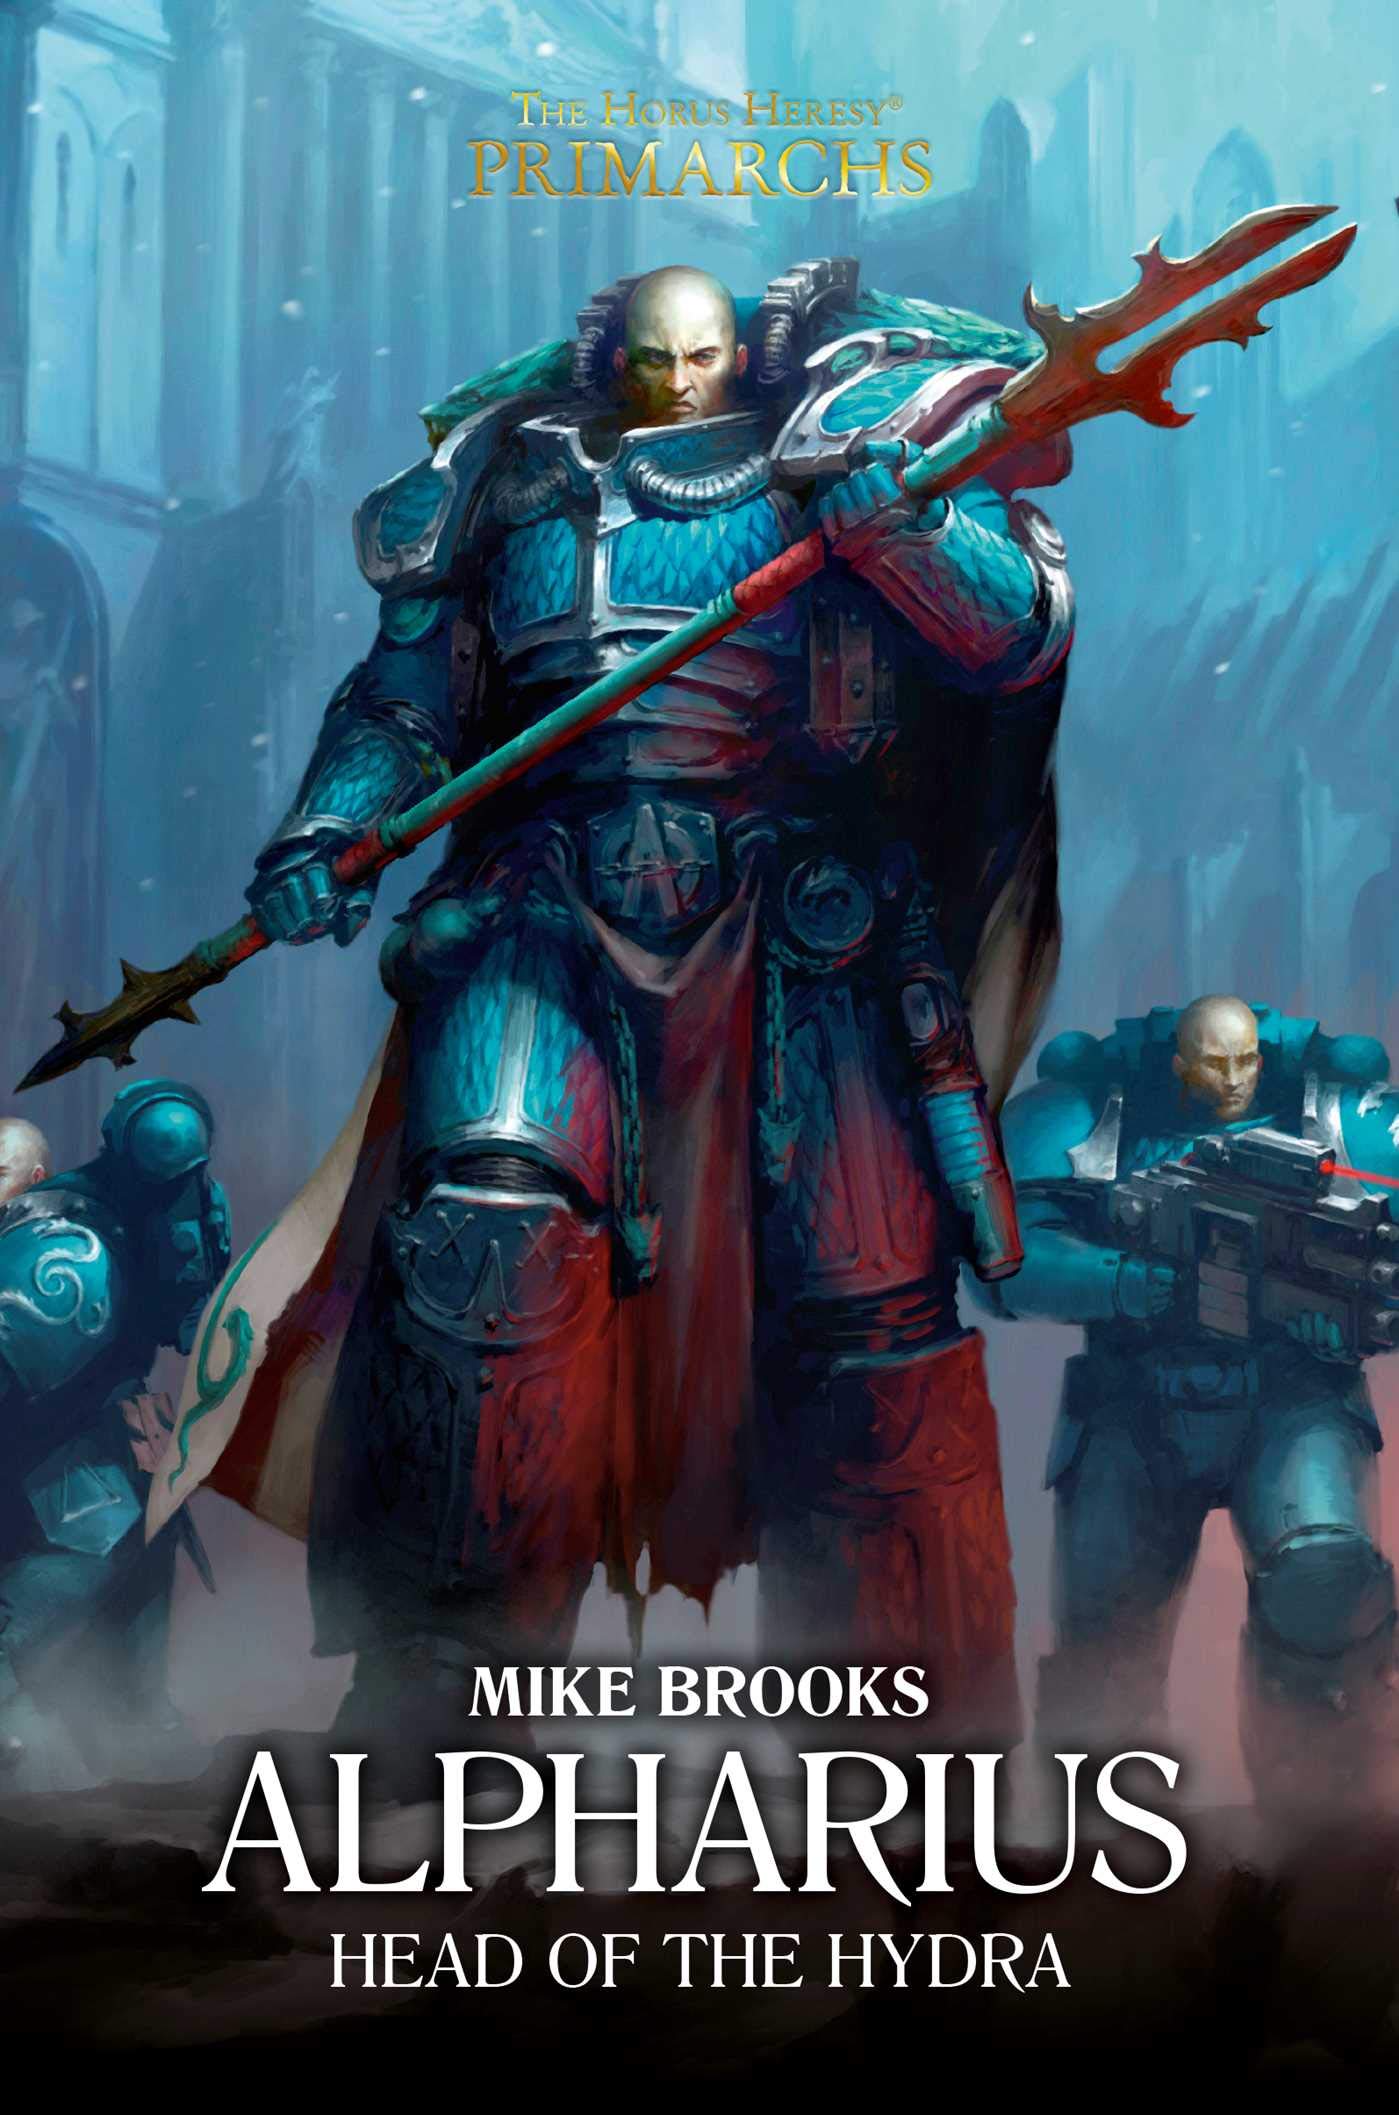 Book Review: Alpharius: Head of the Hydra, by Mike Brooks | Goonhammer